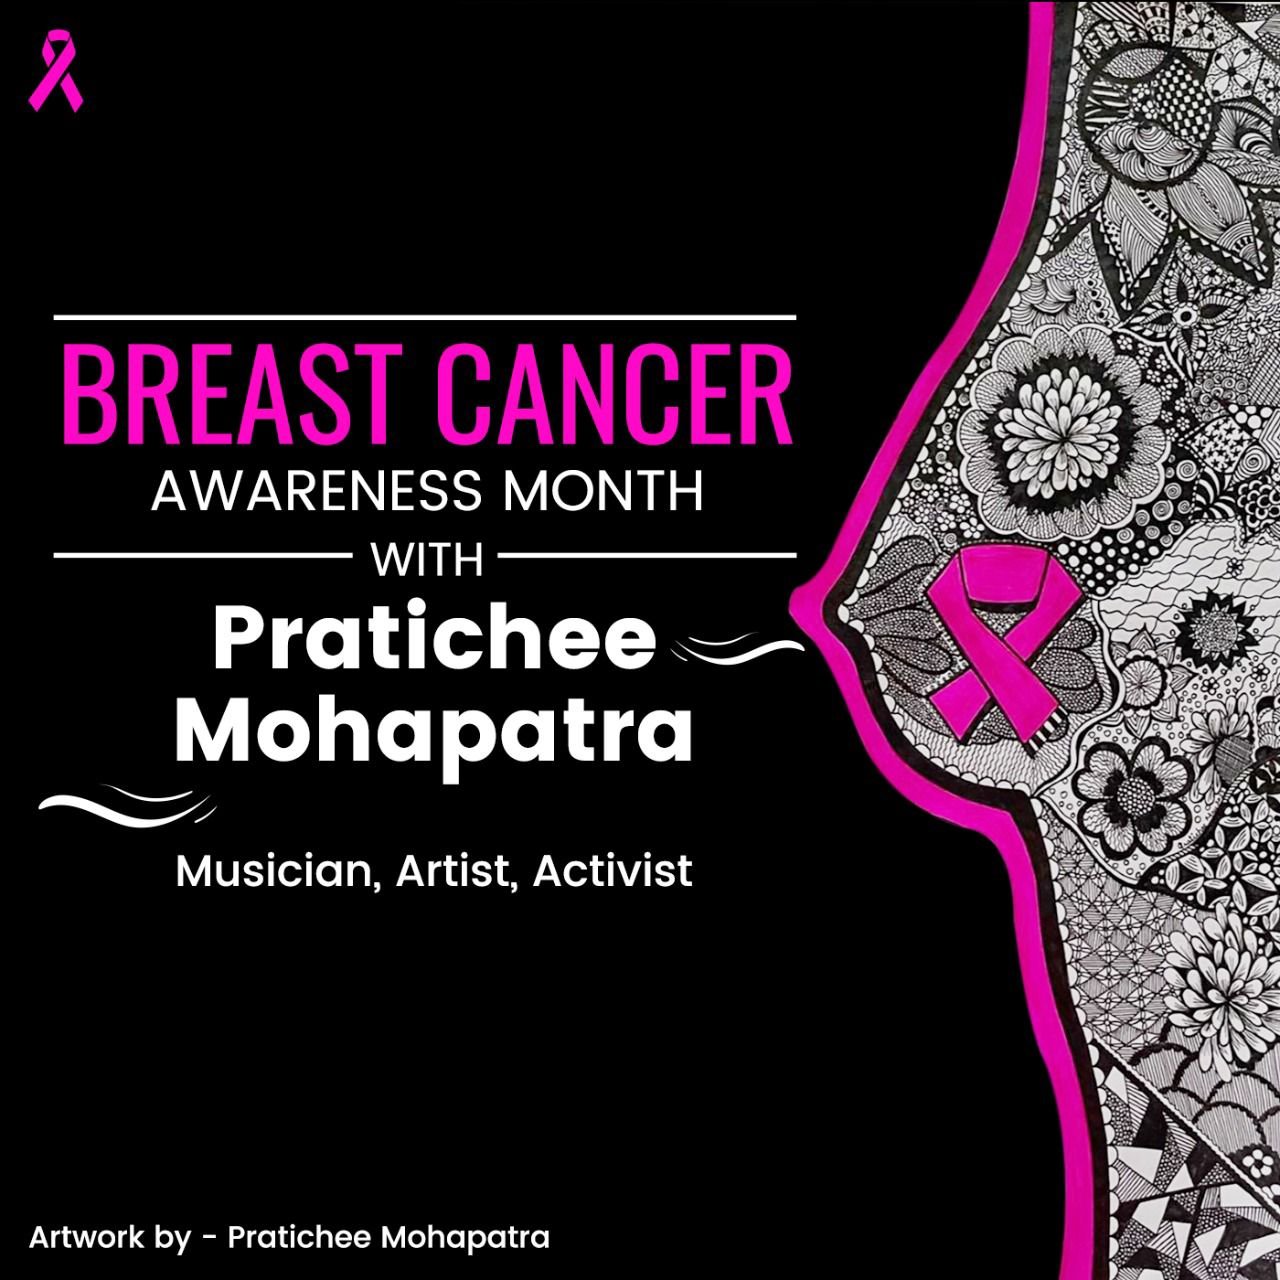 Hungama Artist Aloud joins singer Pratichee Mohapatra for International Breast Cancer Awareness campaign throughout October